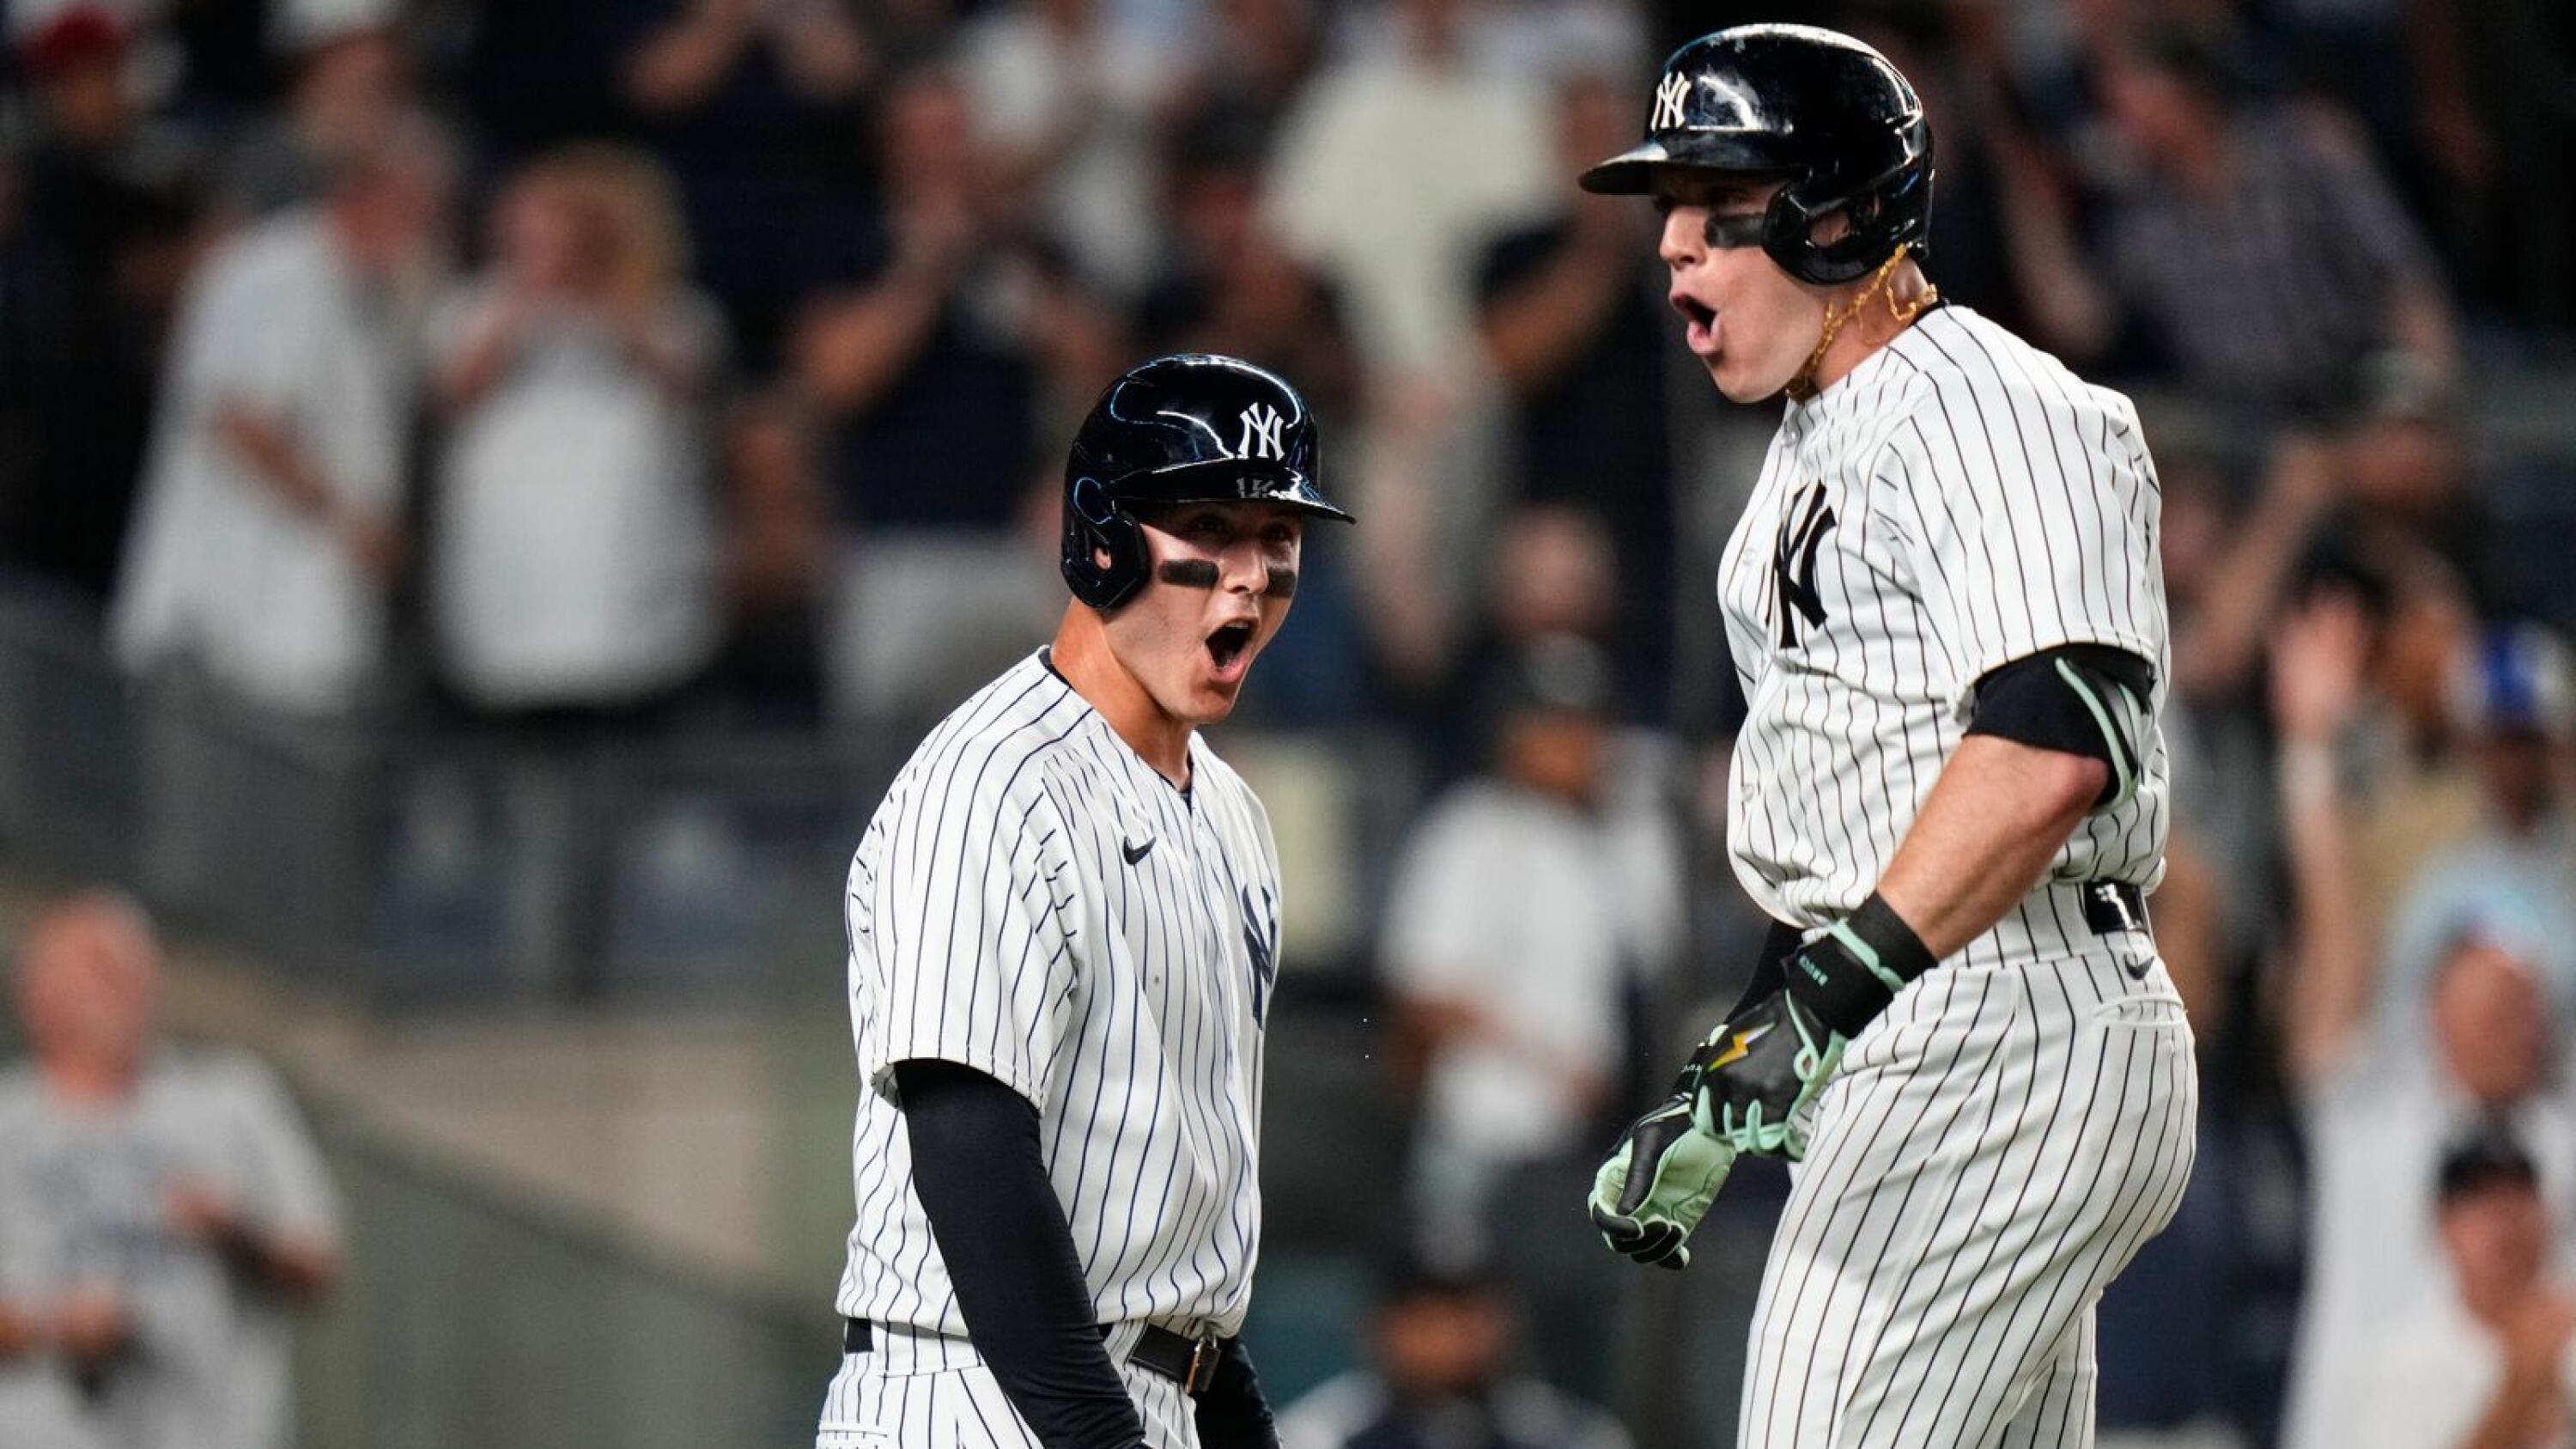 Bader hits a 3-run homer in the 8th inning as the Yankees rally late to  beat the Orioles 6-3